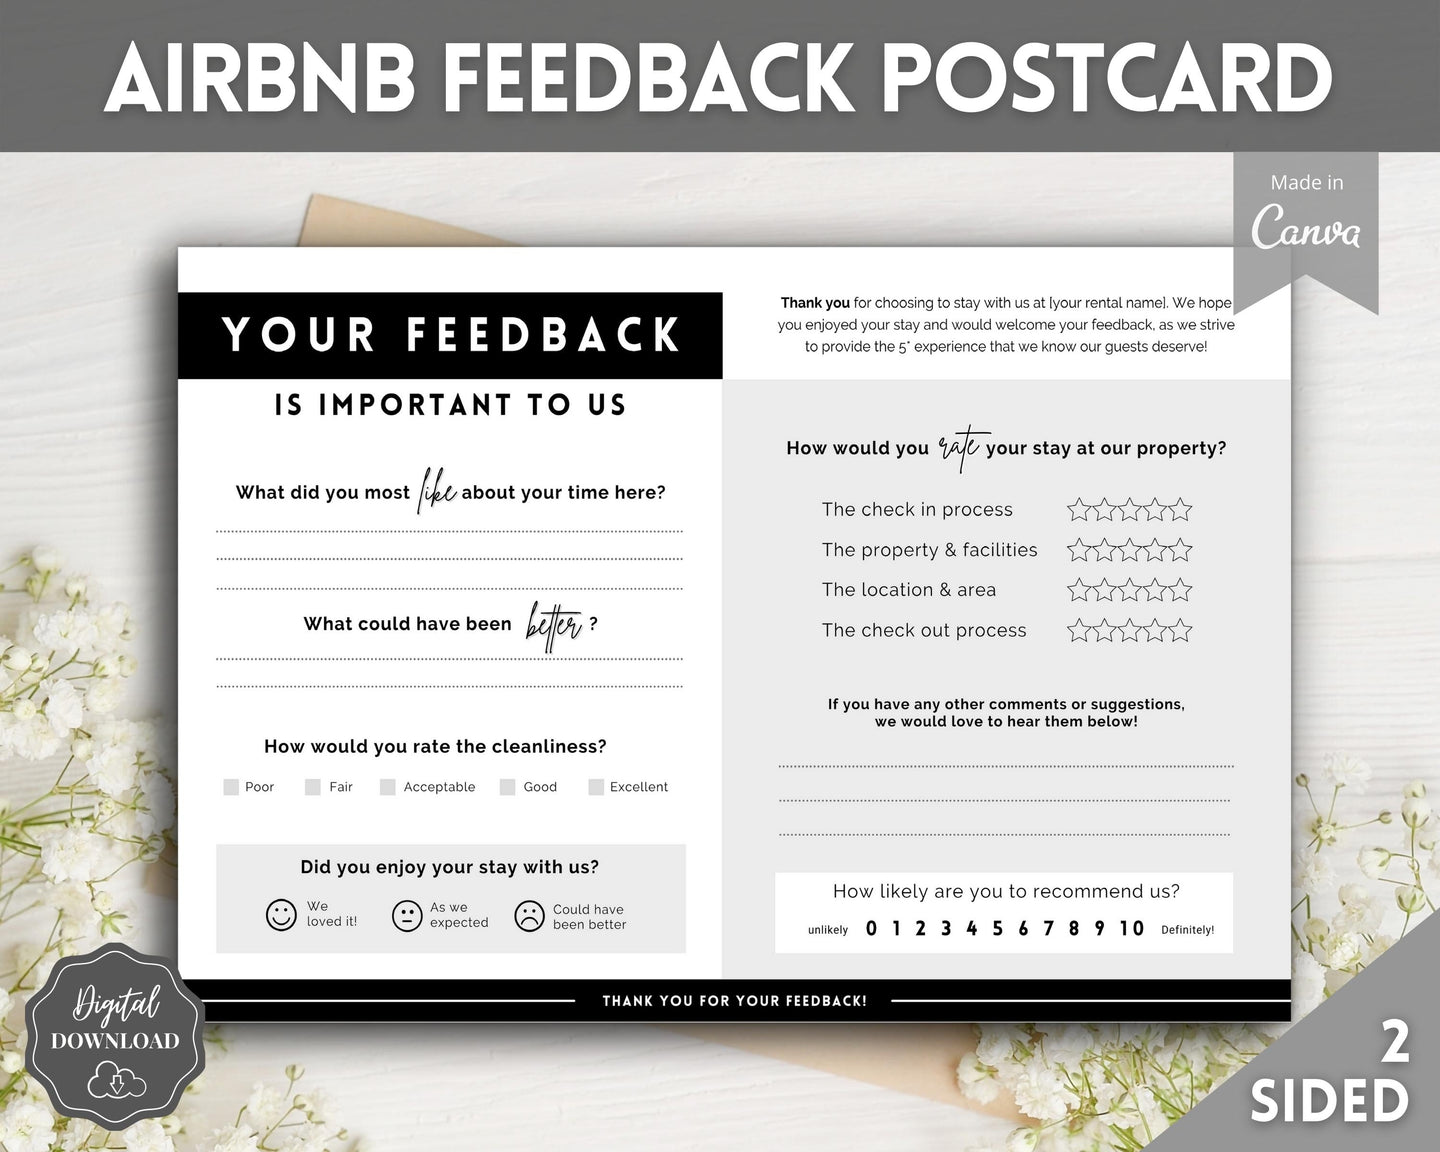 Airbnb Feedback Request Postcard, Editable Airbnb Guest Rating & Review Form, Air bnb Welcome Book, Check Out Signs, VRBO Signage, STR Host - Black